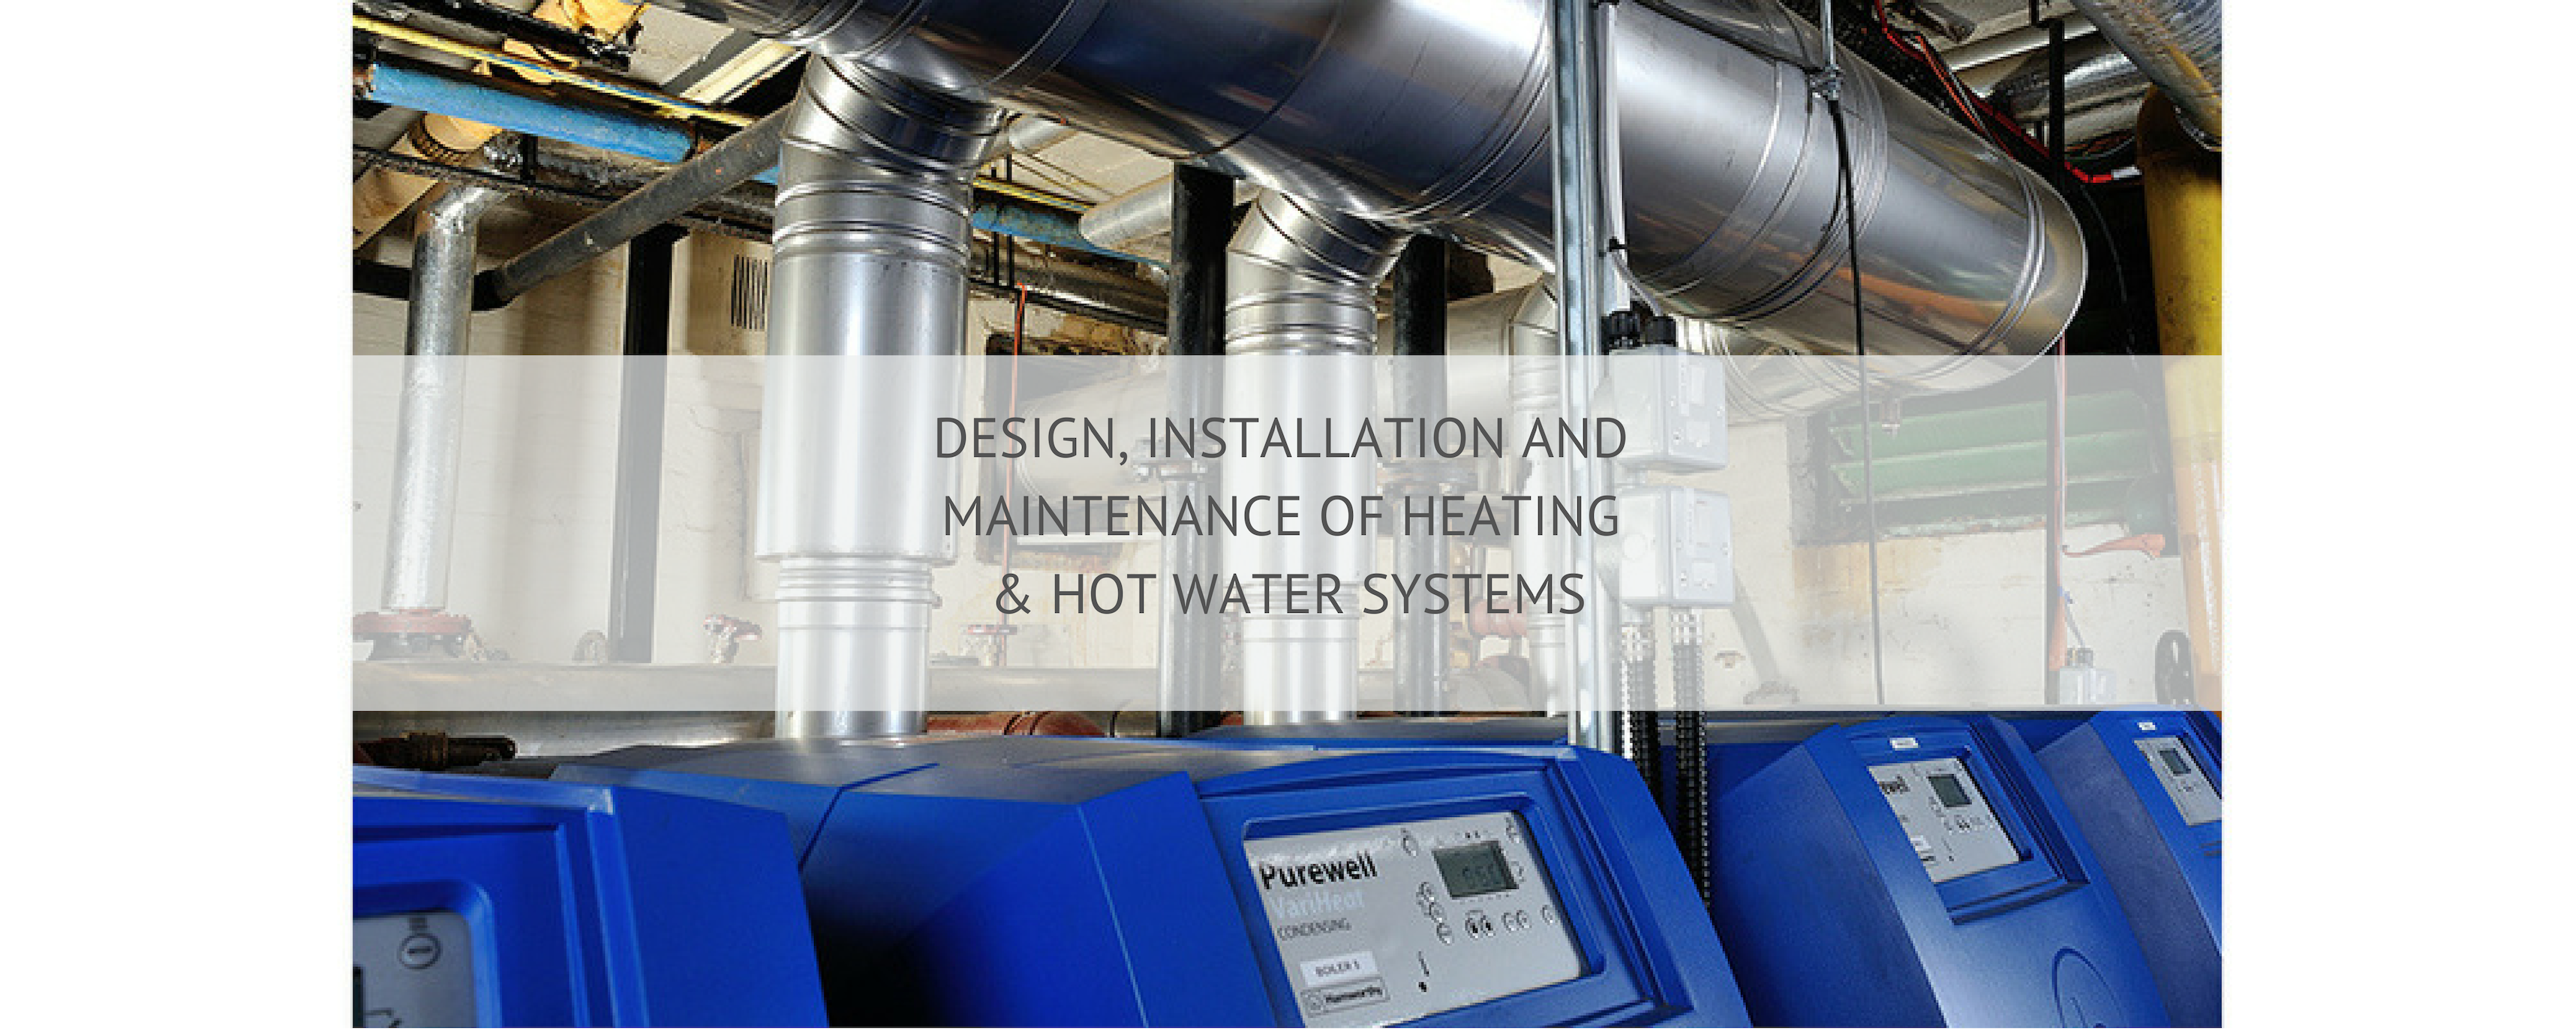 Design, Installation and Maintenance of Heating & Hot Water Systems